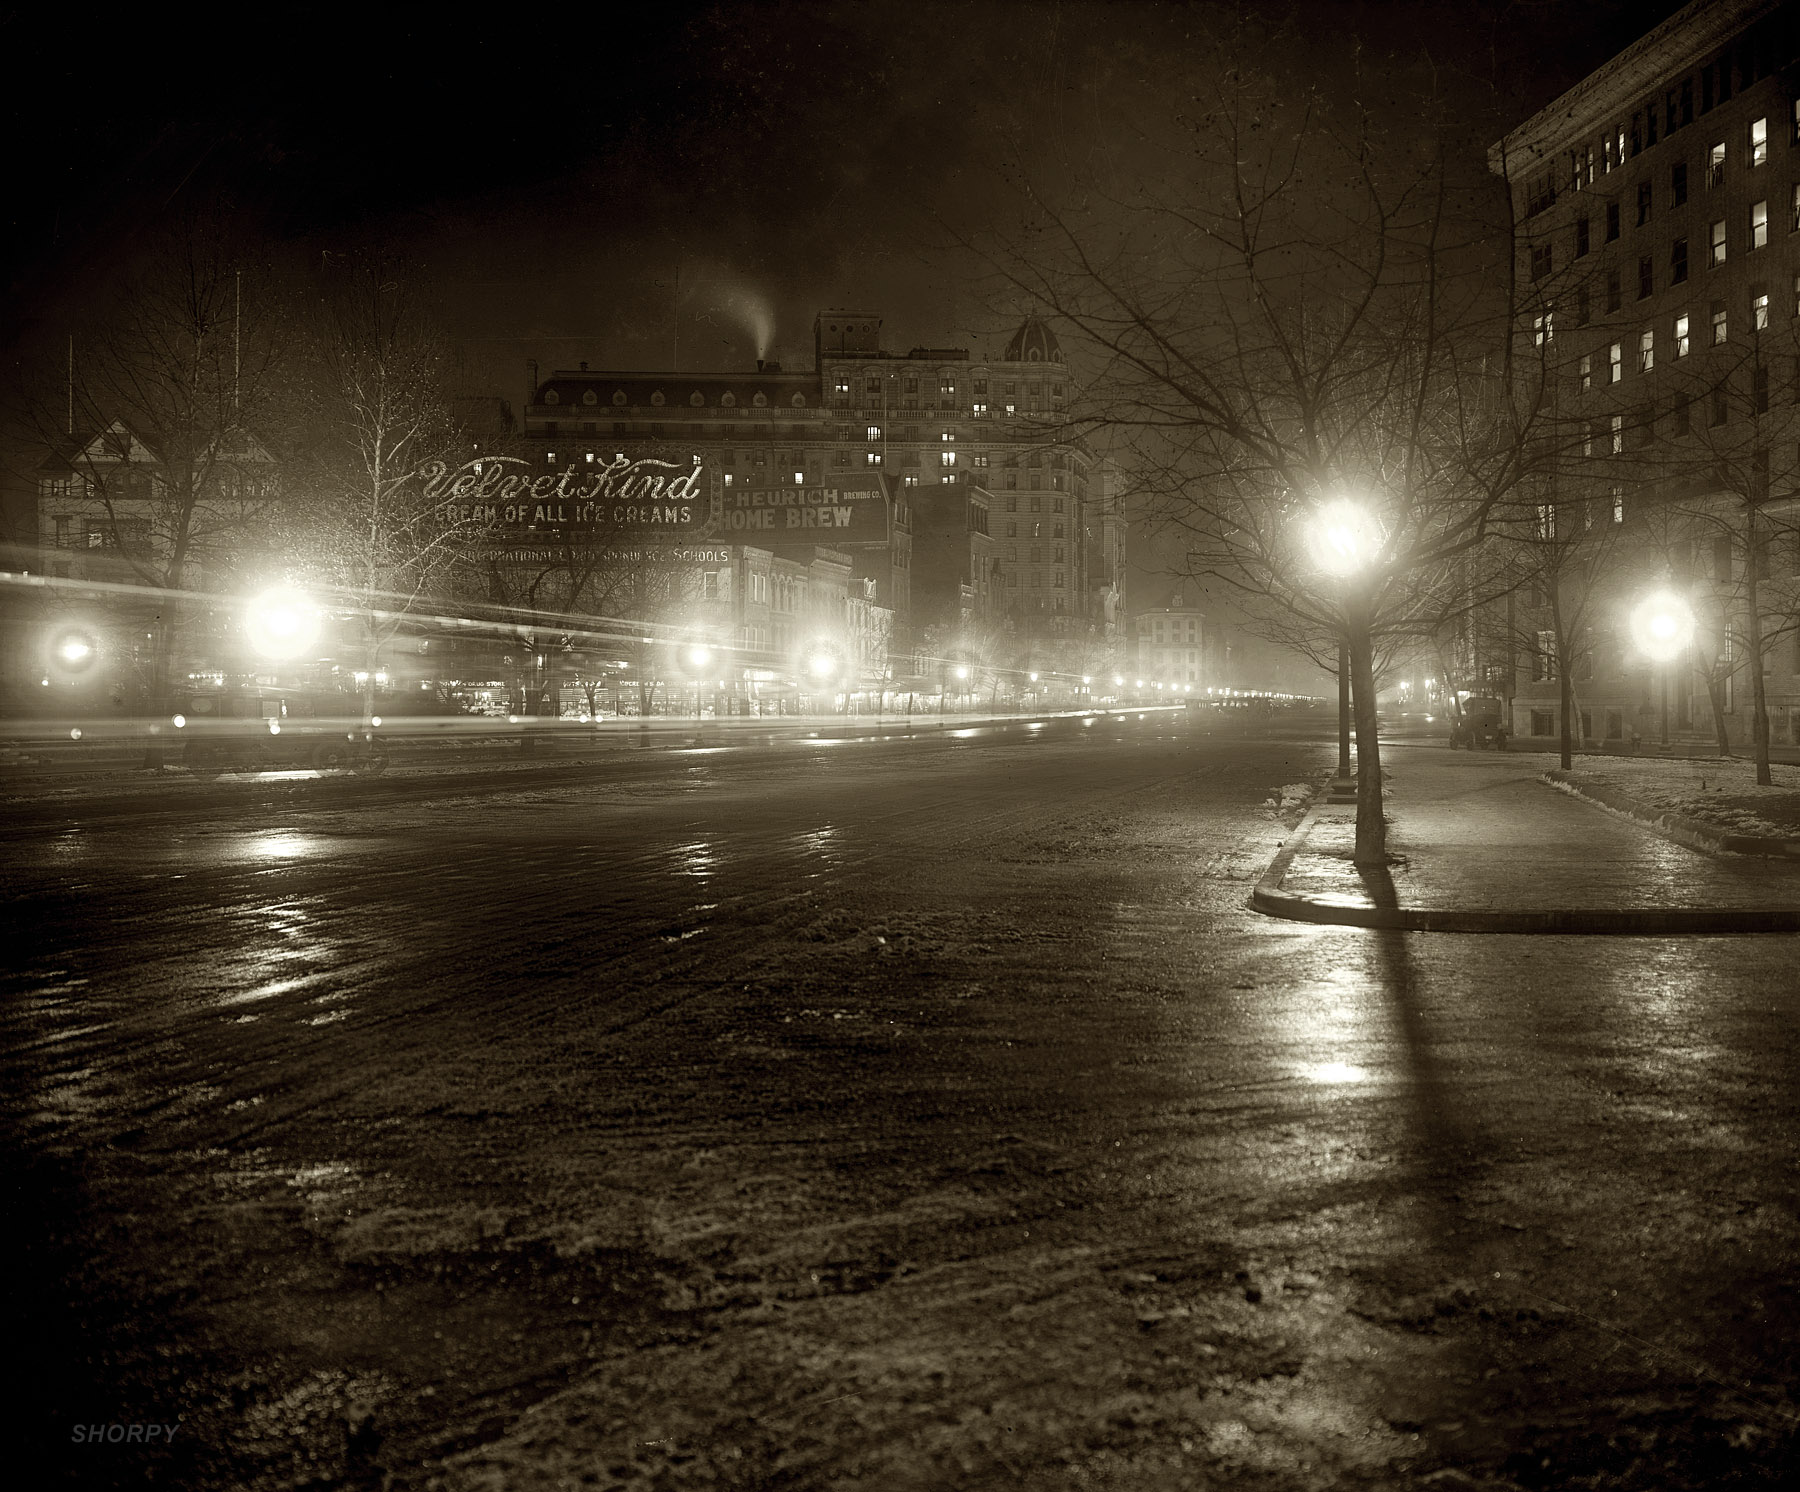  "Pennsylvania Avenue at night." A wintry Washington, D.C., scene circa 1926. View full size. National Photo Company Collection glass negative.